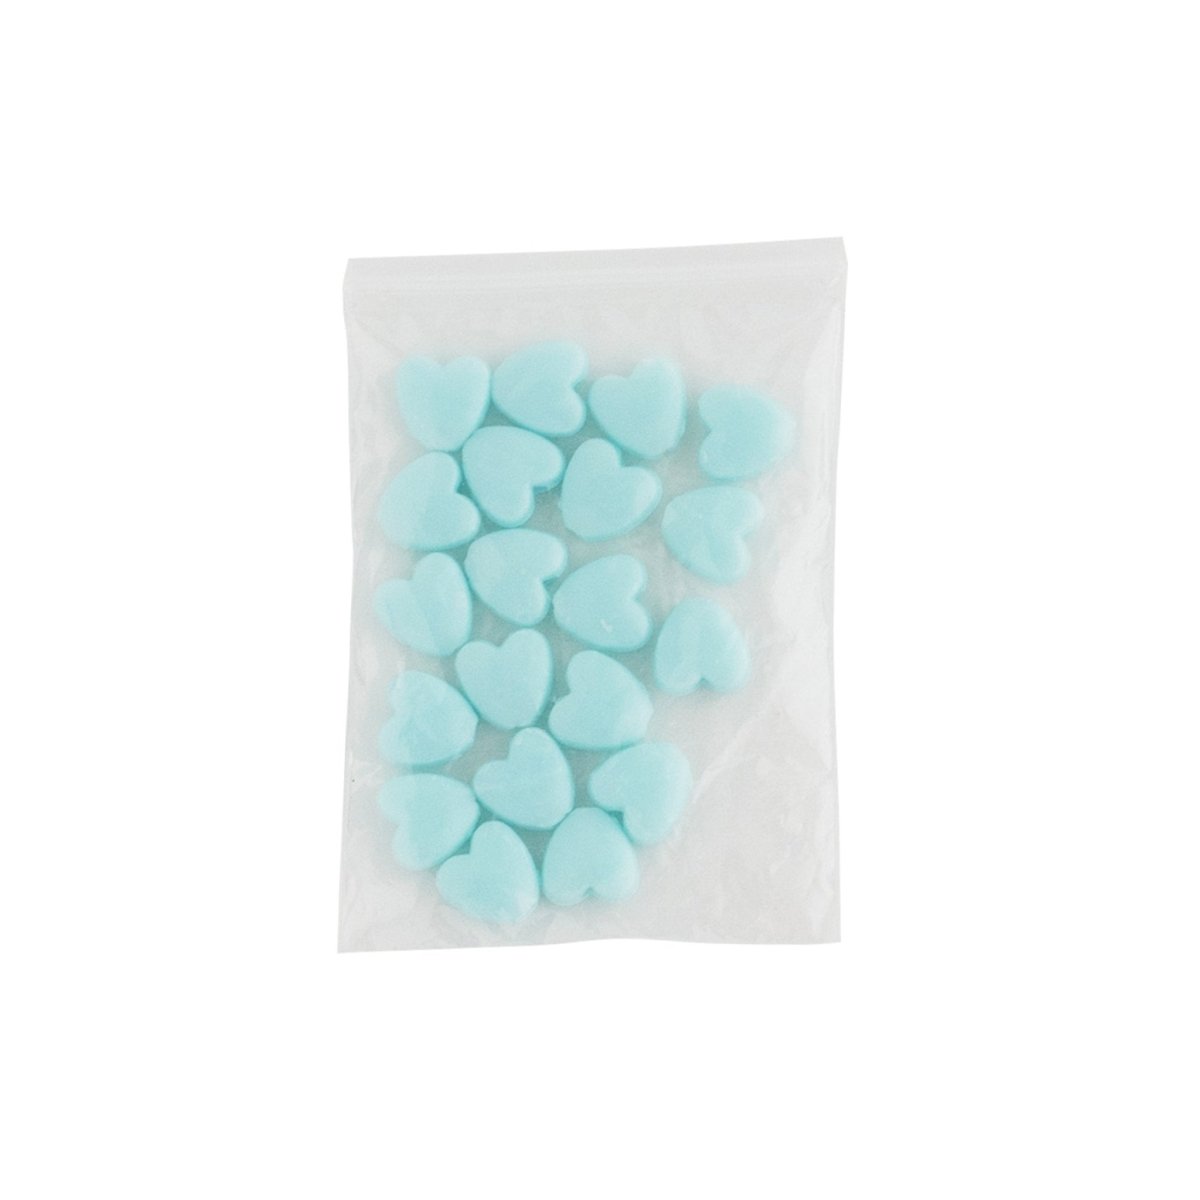 Accent Beads Hearts Mini Light Blue from Cara & Co Craft Supply